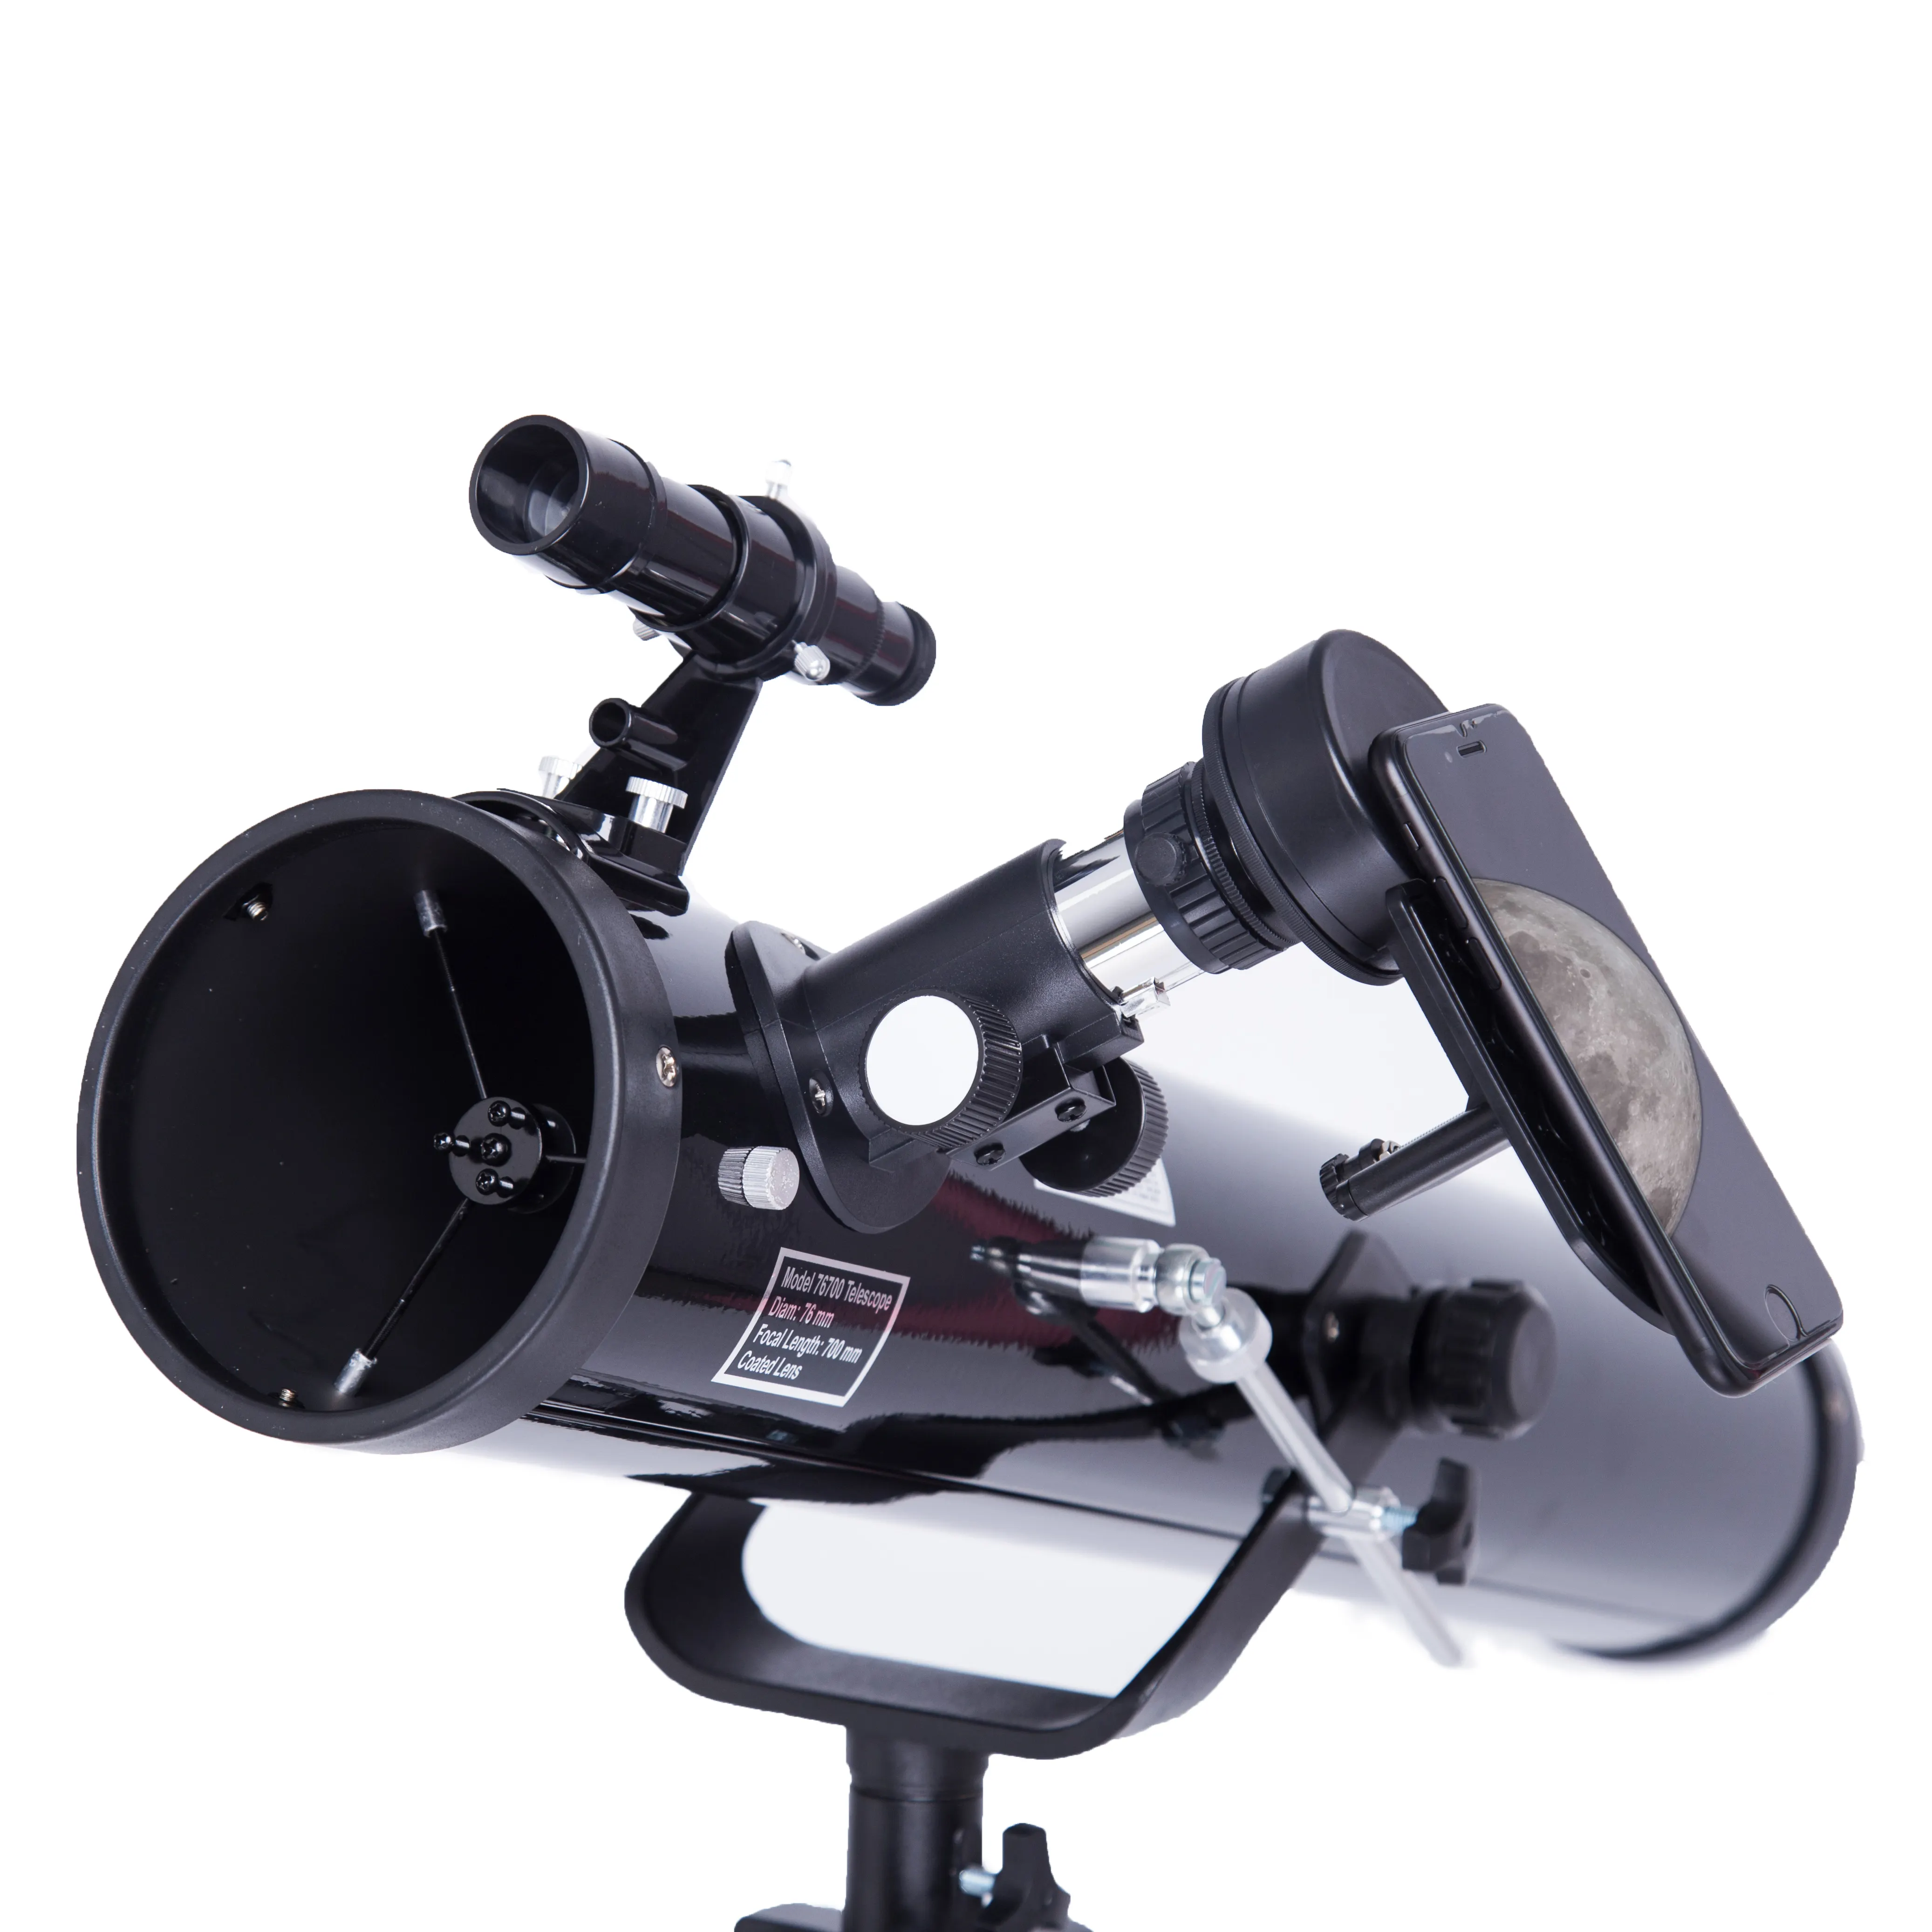 FORESEEN Professional Mobile Phone Reflector Astronomical Telescope / Telescopio To View Moon And Plant